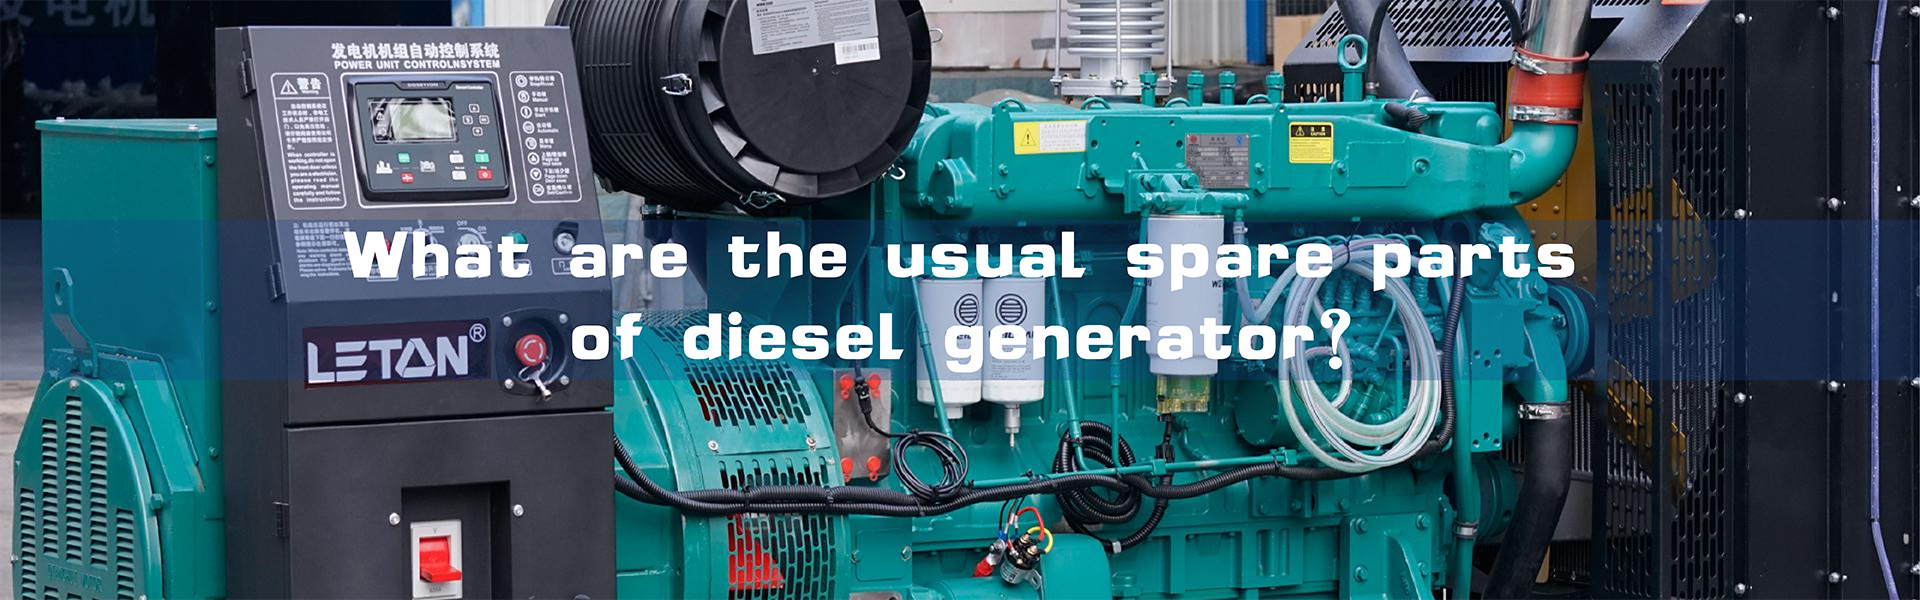 What are the usual spare parts of diesel generator?